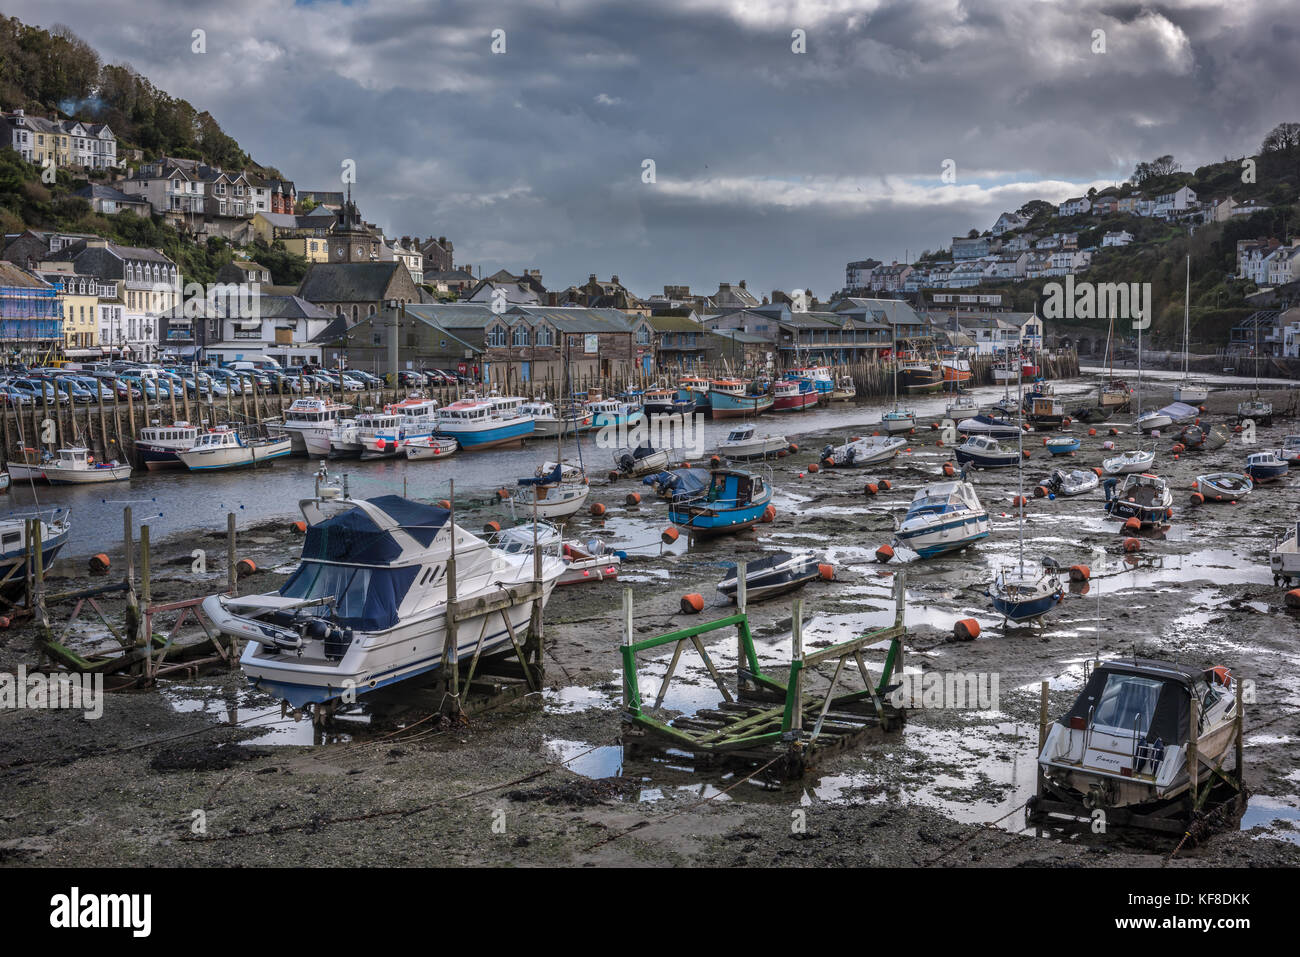 The picturesque harbour at low tide, in the working fishing port of Looe, Cornwall in October. Stock Photo